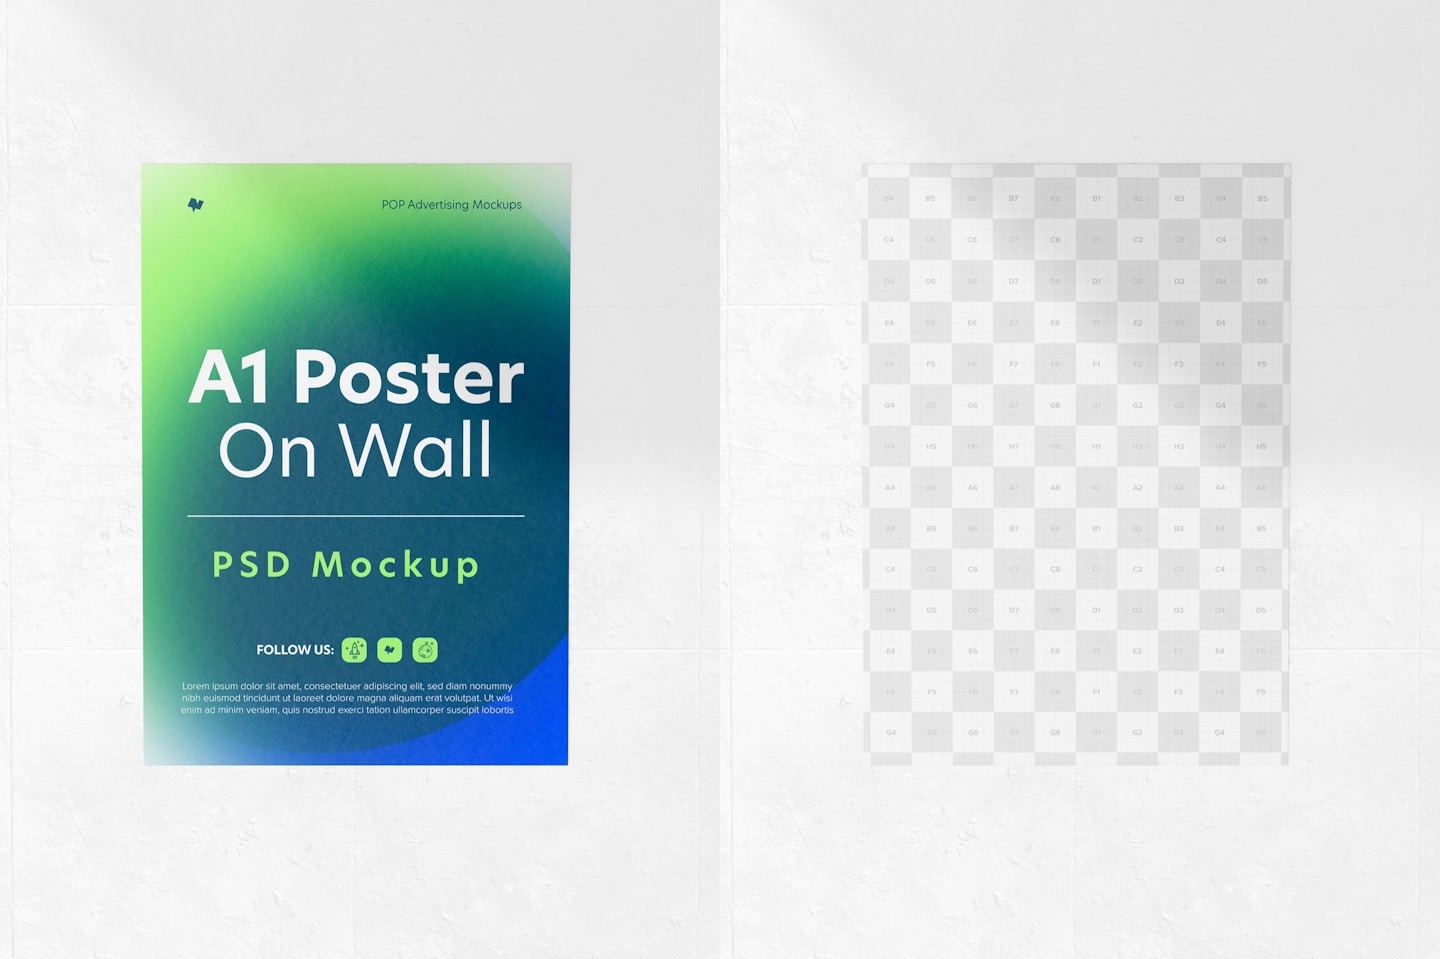 A1 Poster on Wall Mockup